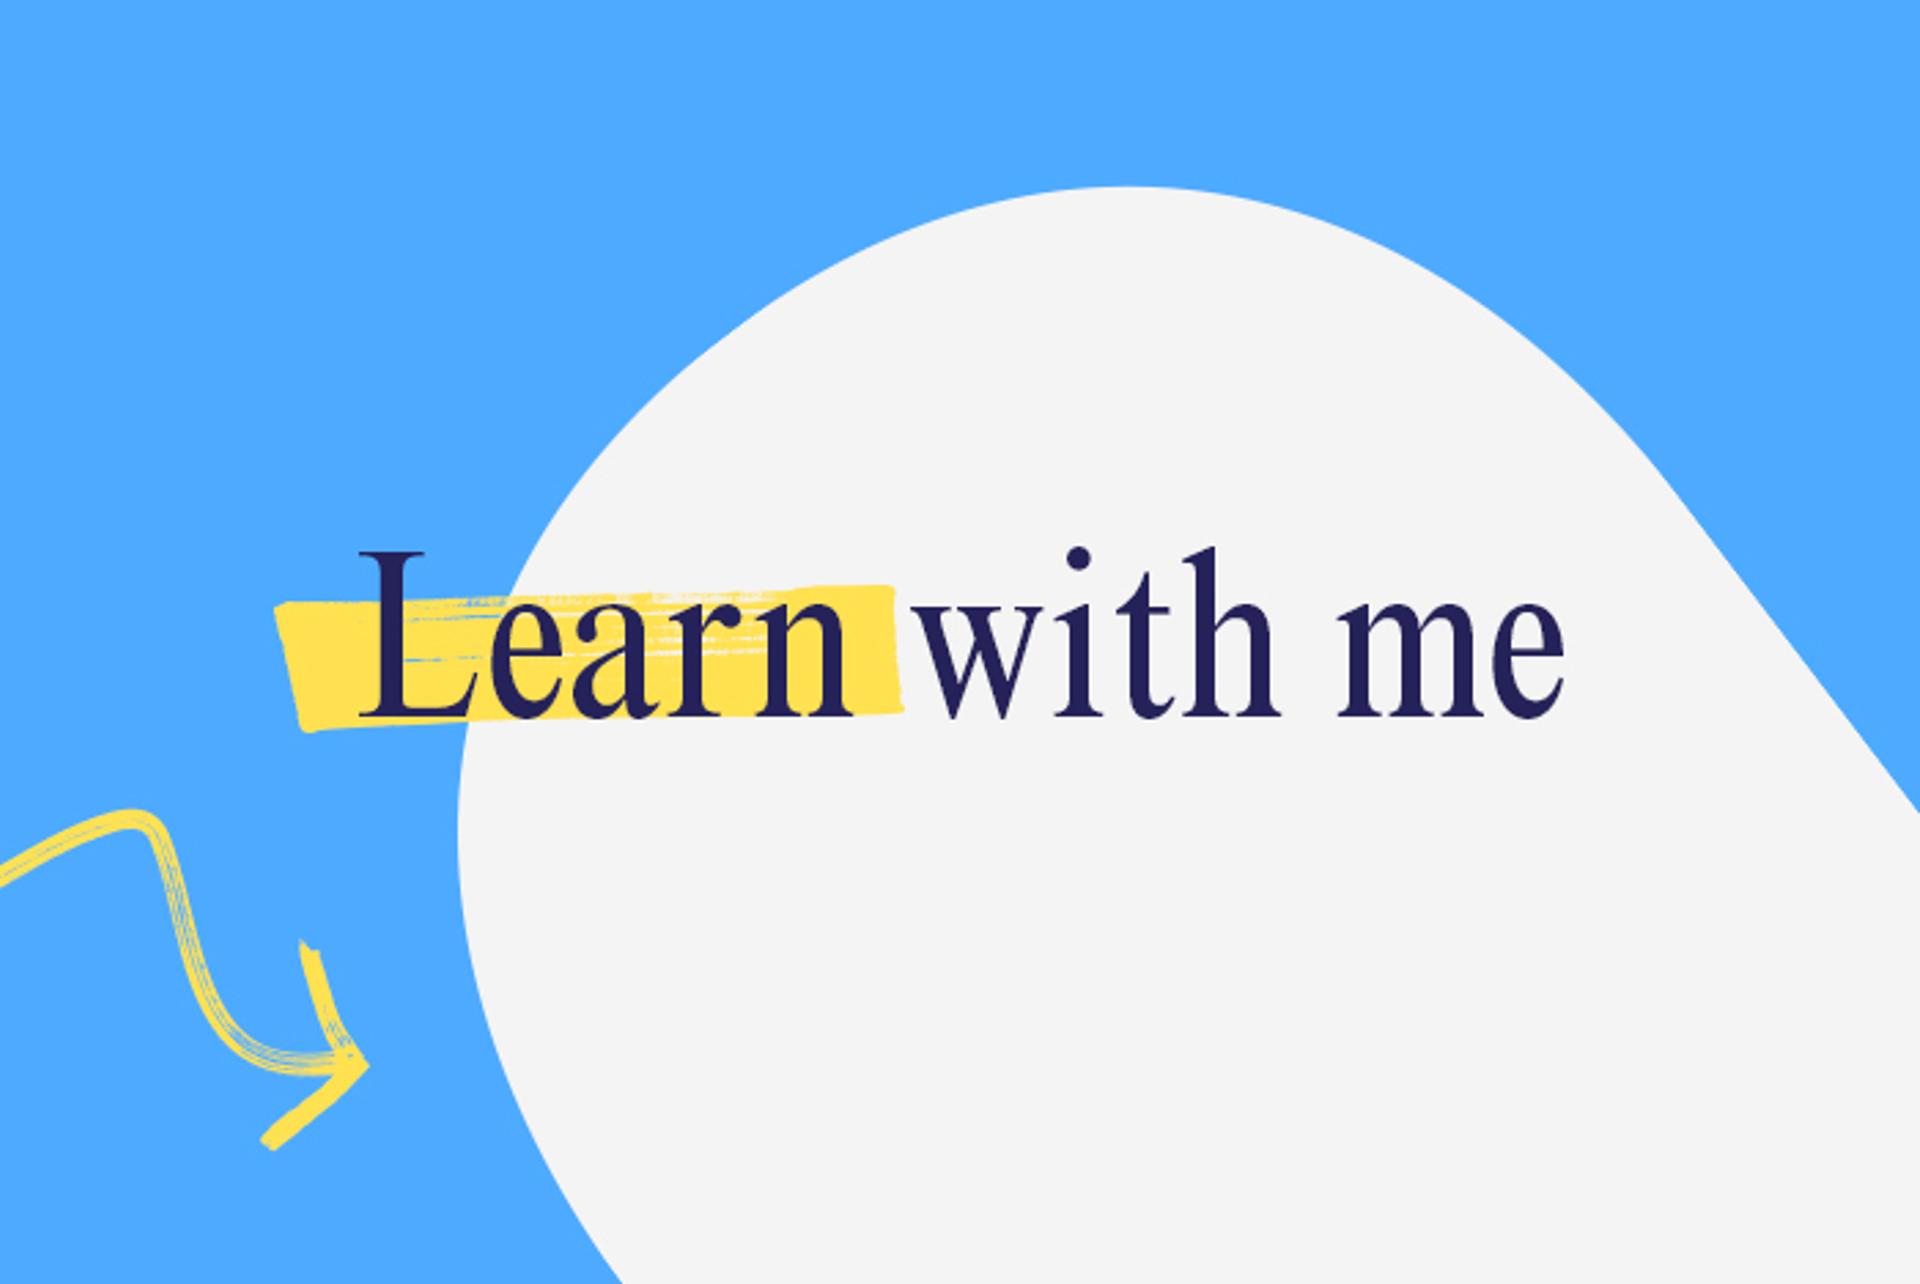 Learn With Me event imagery